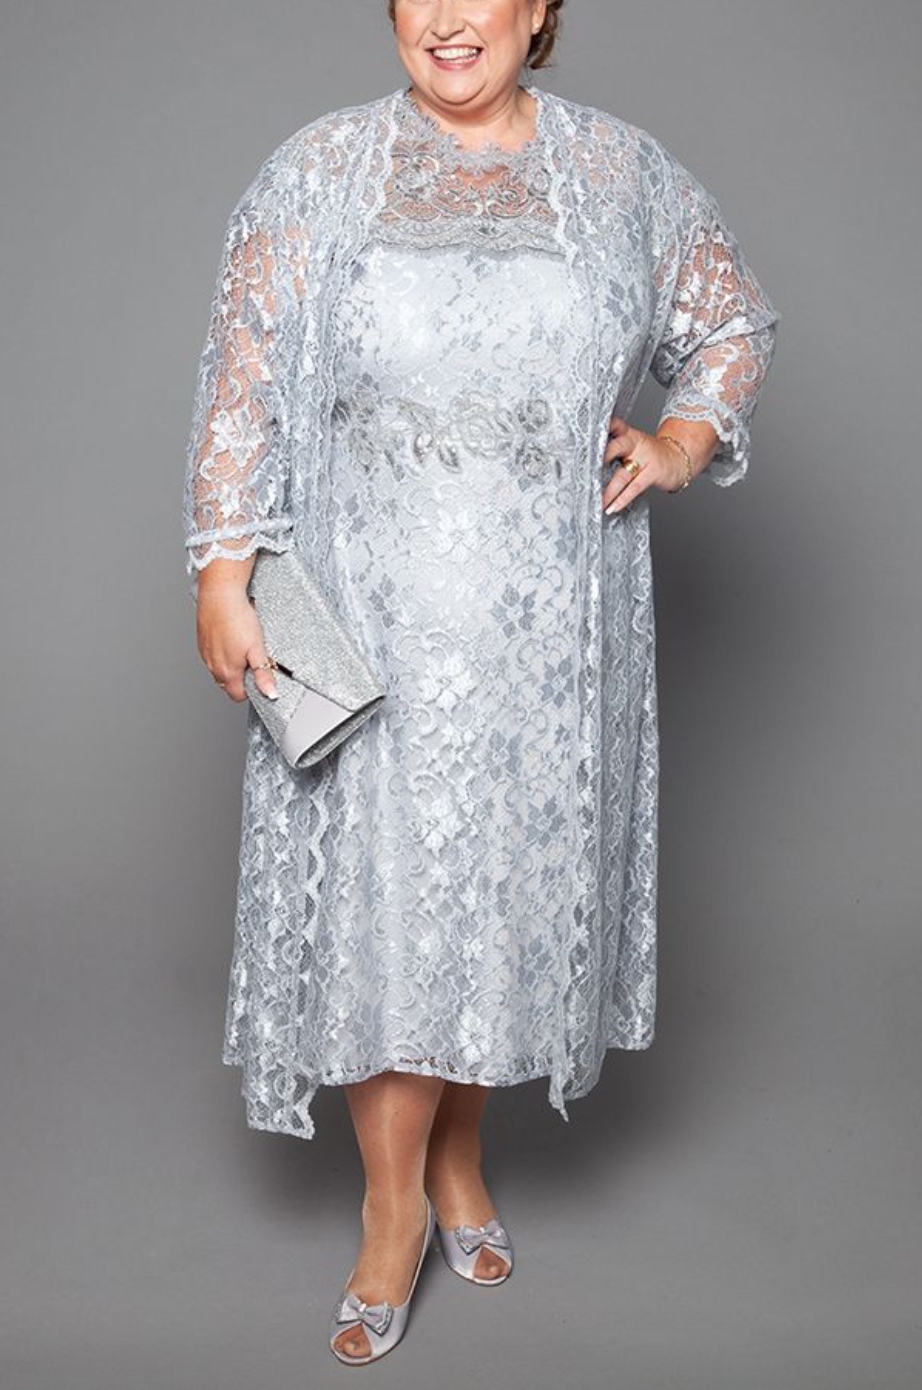 Plus Size Mother Of The Bride Dresses And Outfits